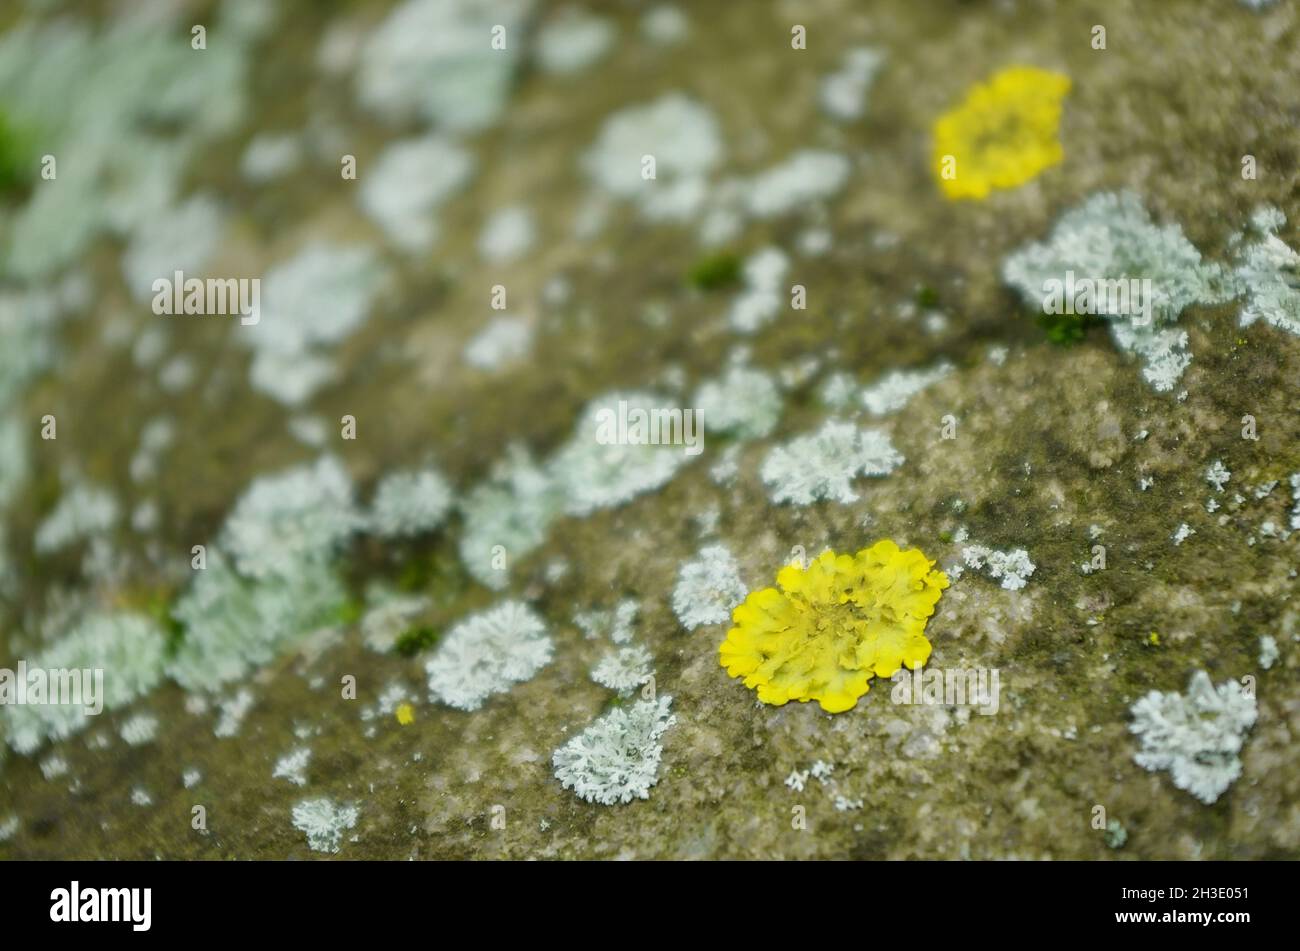 Yellow lichen on the bark of a tree. Tree trunk affected by lichen. Moss on a tree branch. Textured wood surface with lichens colony. Fungus ecosystem Stock Photo